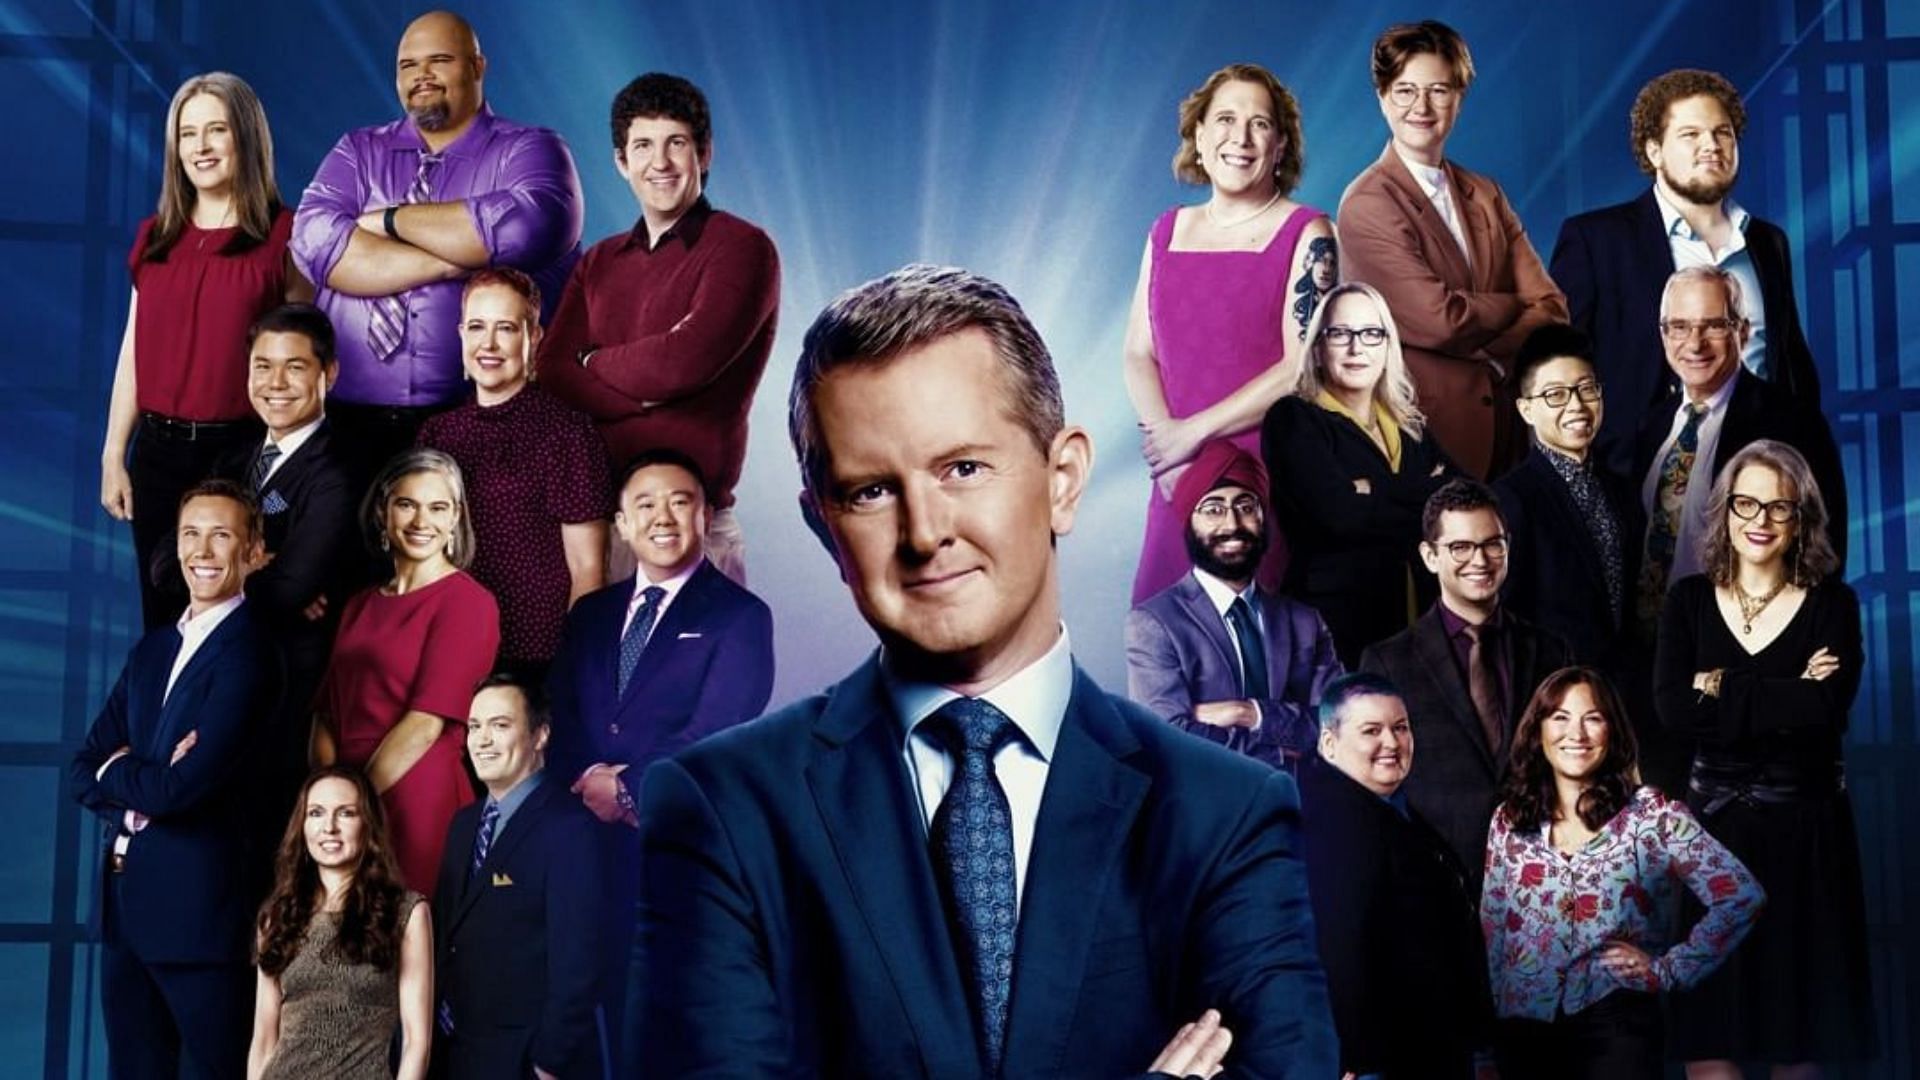 Jeopardy!&rsquo;s Tournament of Champions 2022 is hosted by Ken Jennings